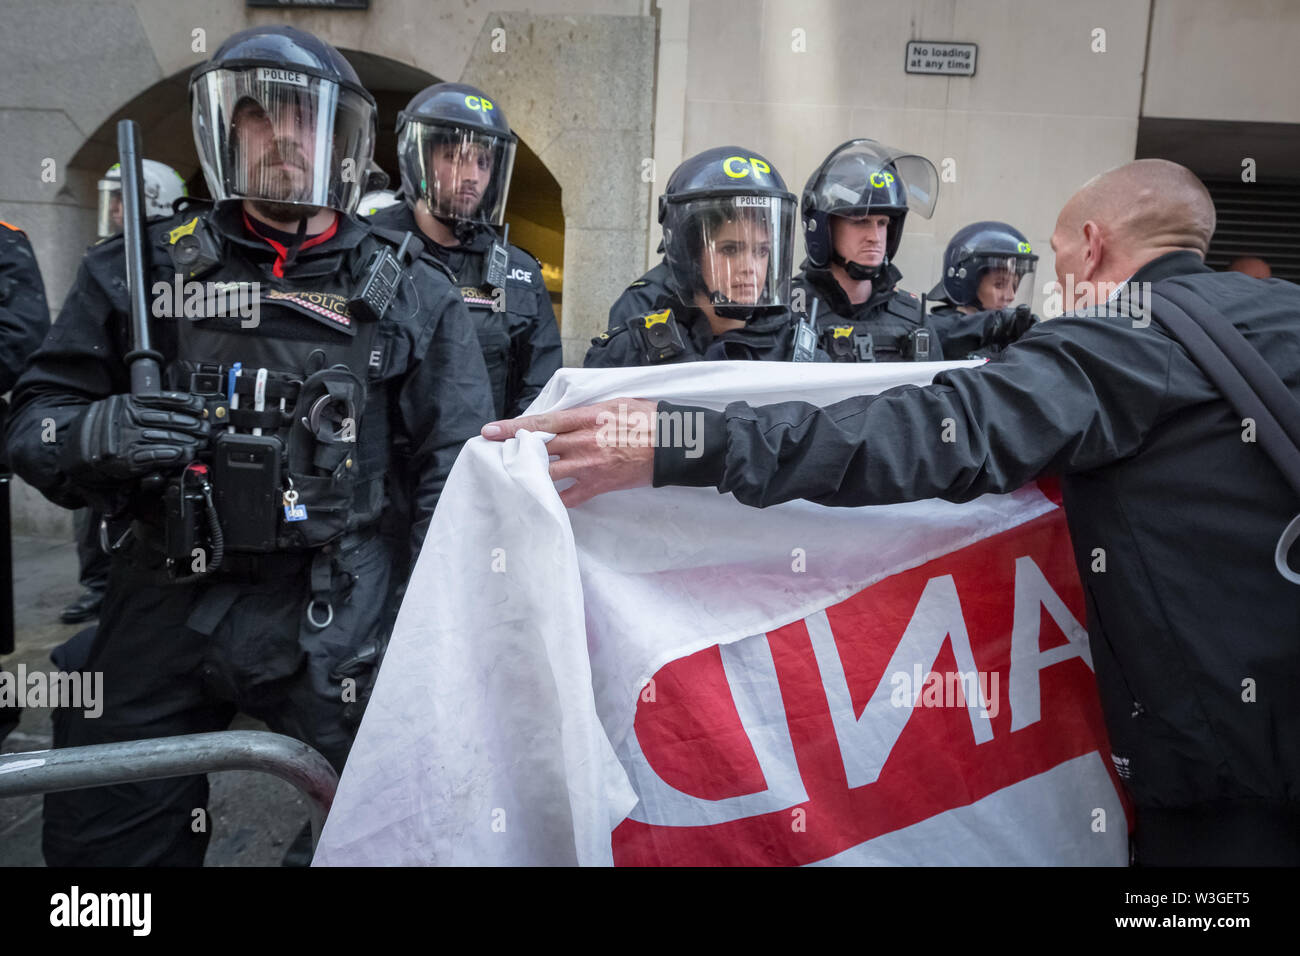 London, UK. 11th July 2019. Angry scenes of civil unrest outside Old Bailey court between riot police and supporters of Tommy Robinson. Sentenced under his real name of Stephen Yaxley-Lennon, a custodial sentence of 19 weeks is ordered after Tommy Robinson was found guilty of contempt of court over the filming outside Leeds Crown Court during a criminal trial last year and broadcasting live on social media. Credit: Guy Corbishley/Alamy Live News Stock Photo